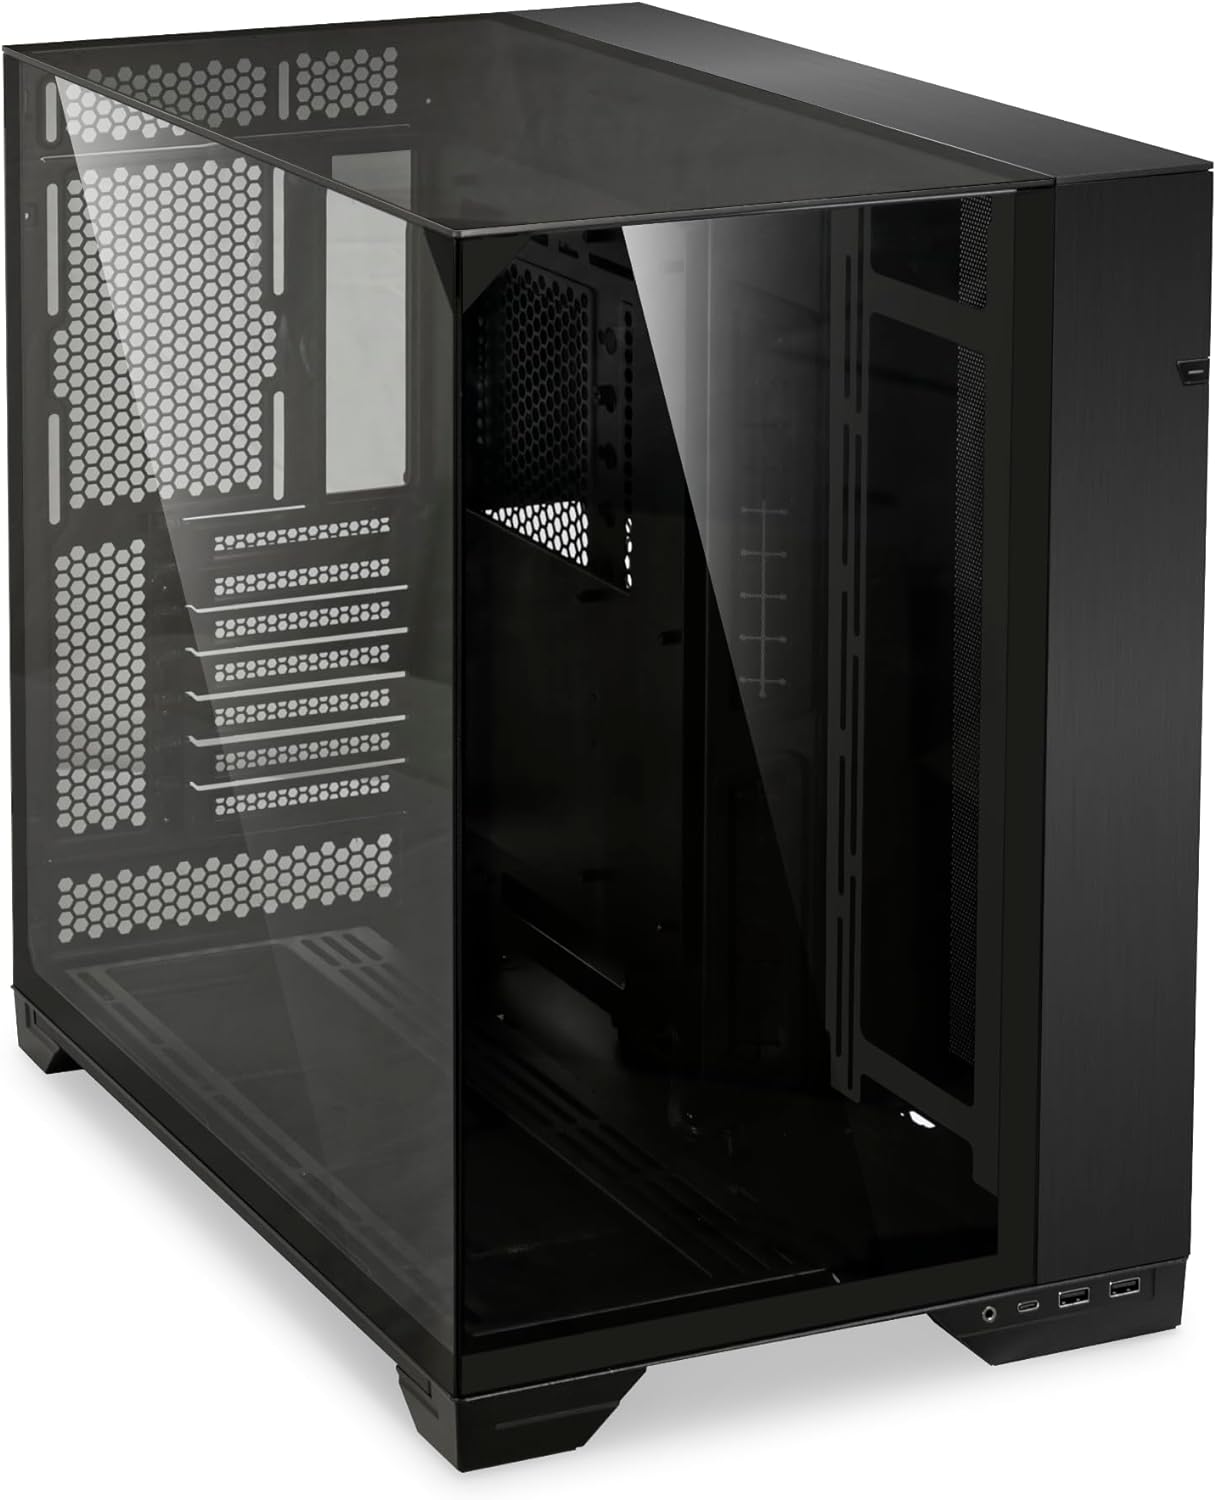 Lian Li O11 Vision -Three Sided Tempered Glass Panels  - Dual-Chamber ATX Mid Tower GAMING CASE